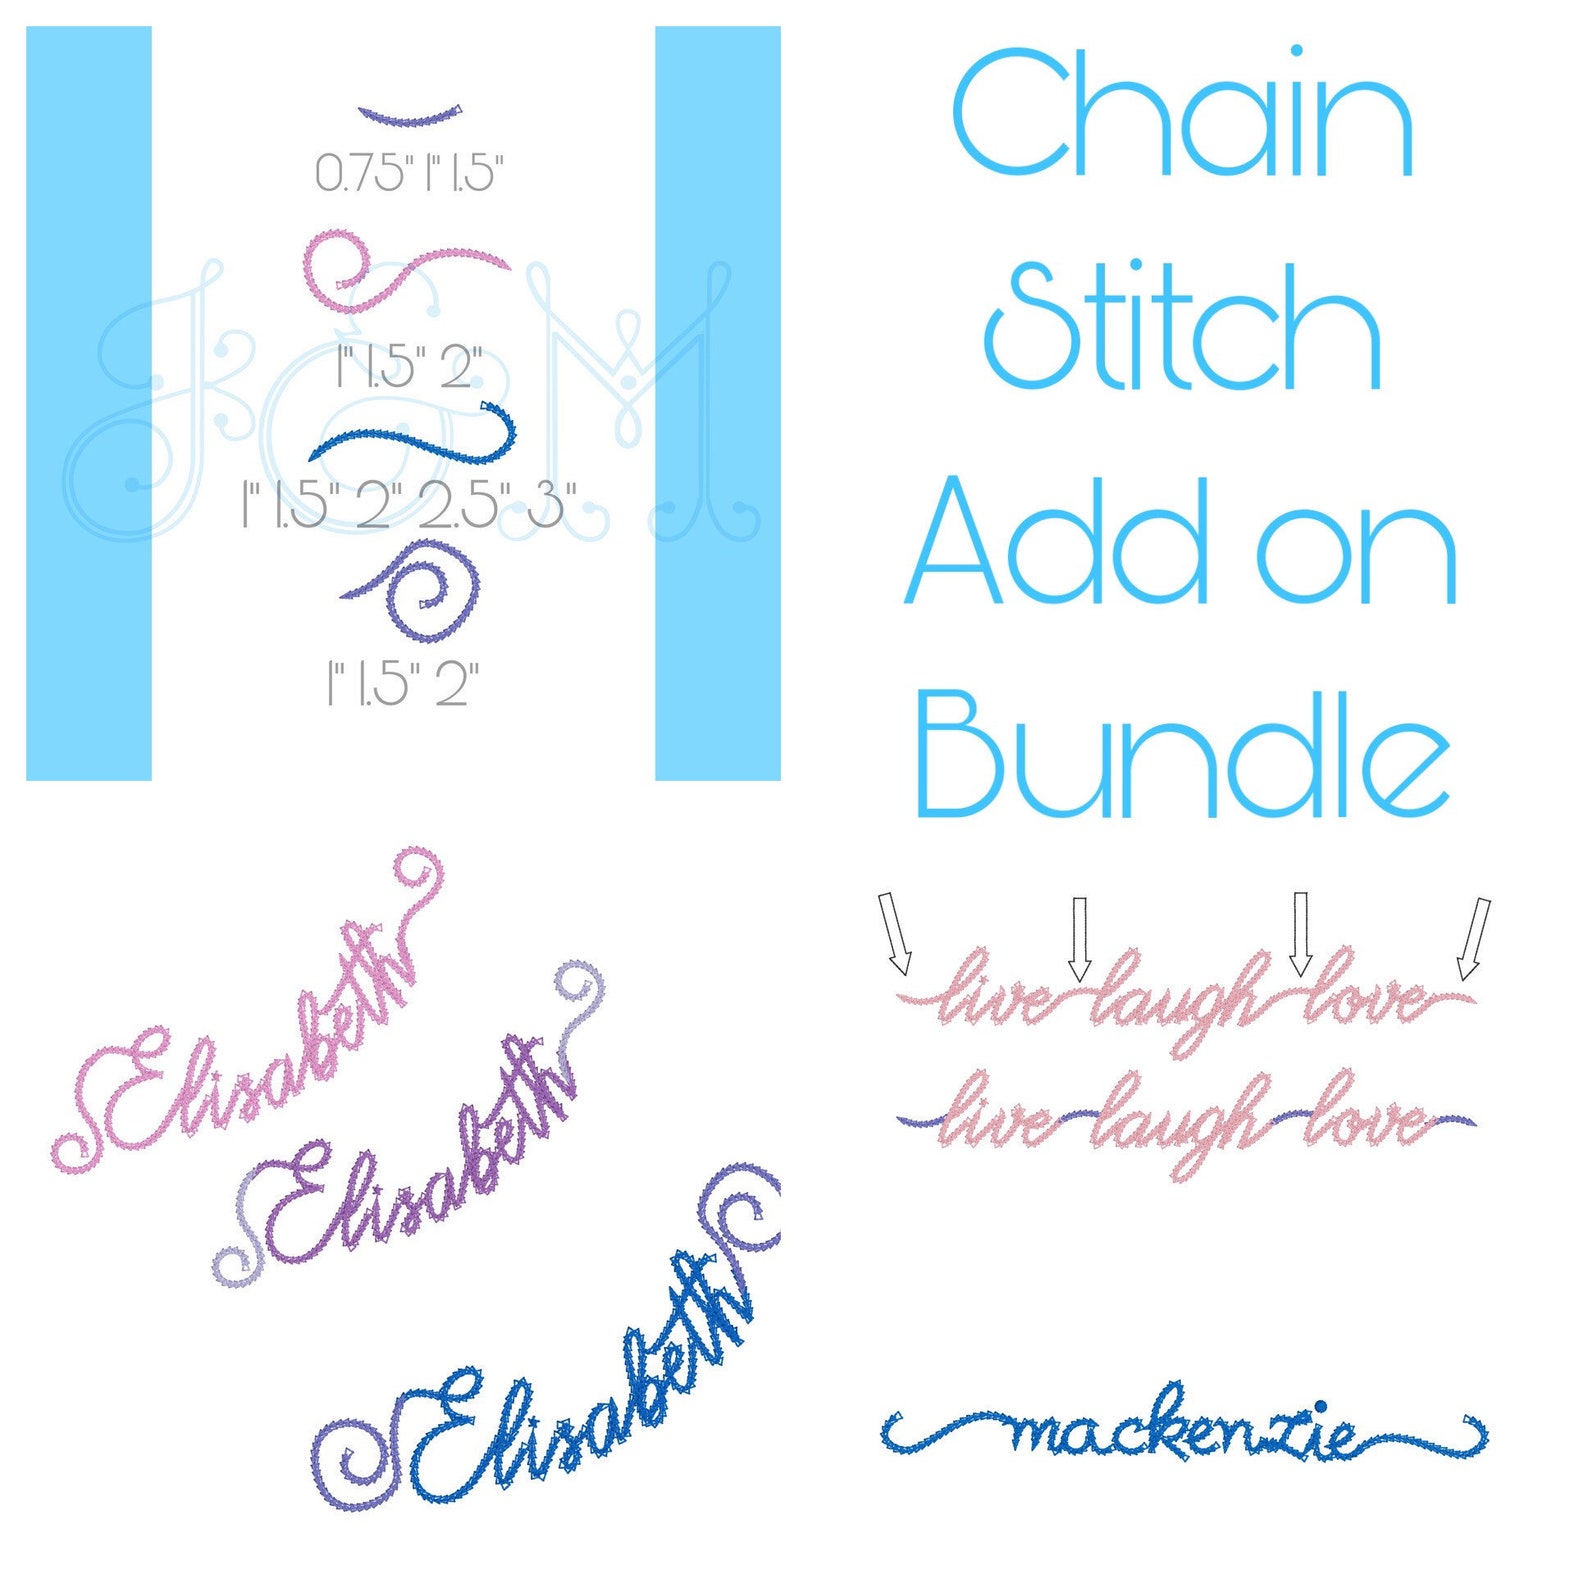 Chain Stitch Font Add on Accent Bundle FONTS NOT INCLUDED - Etsy